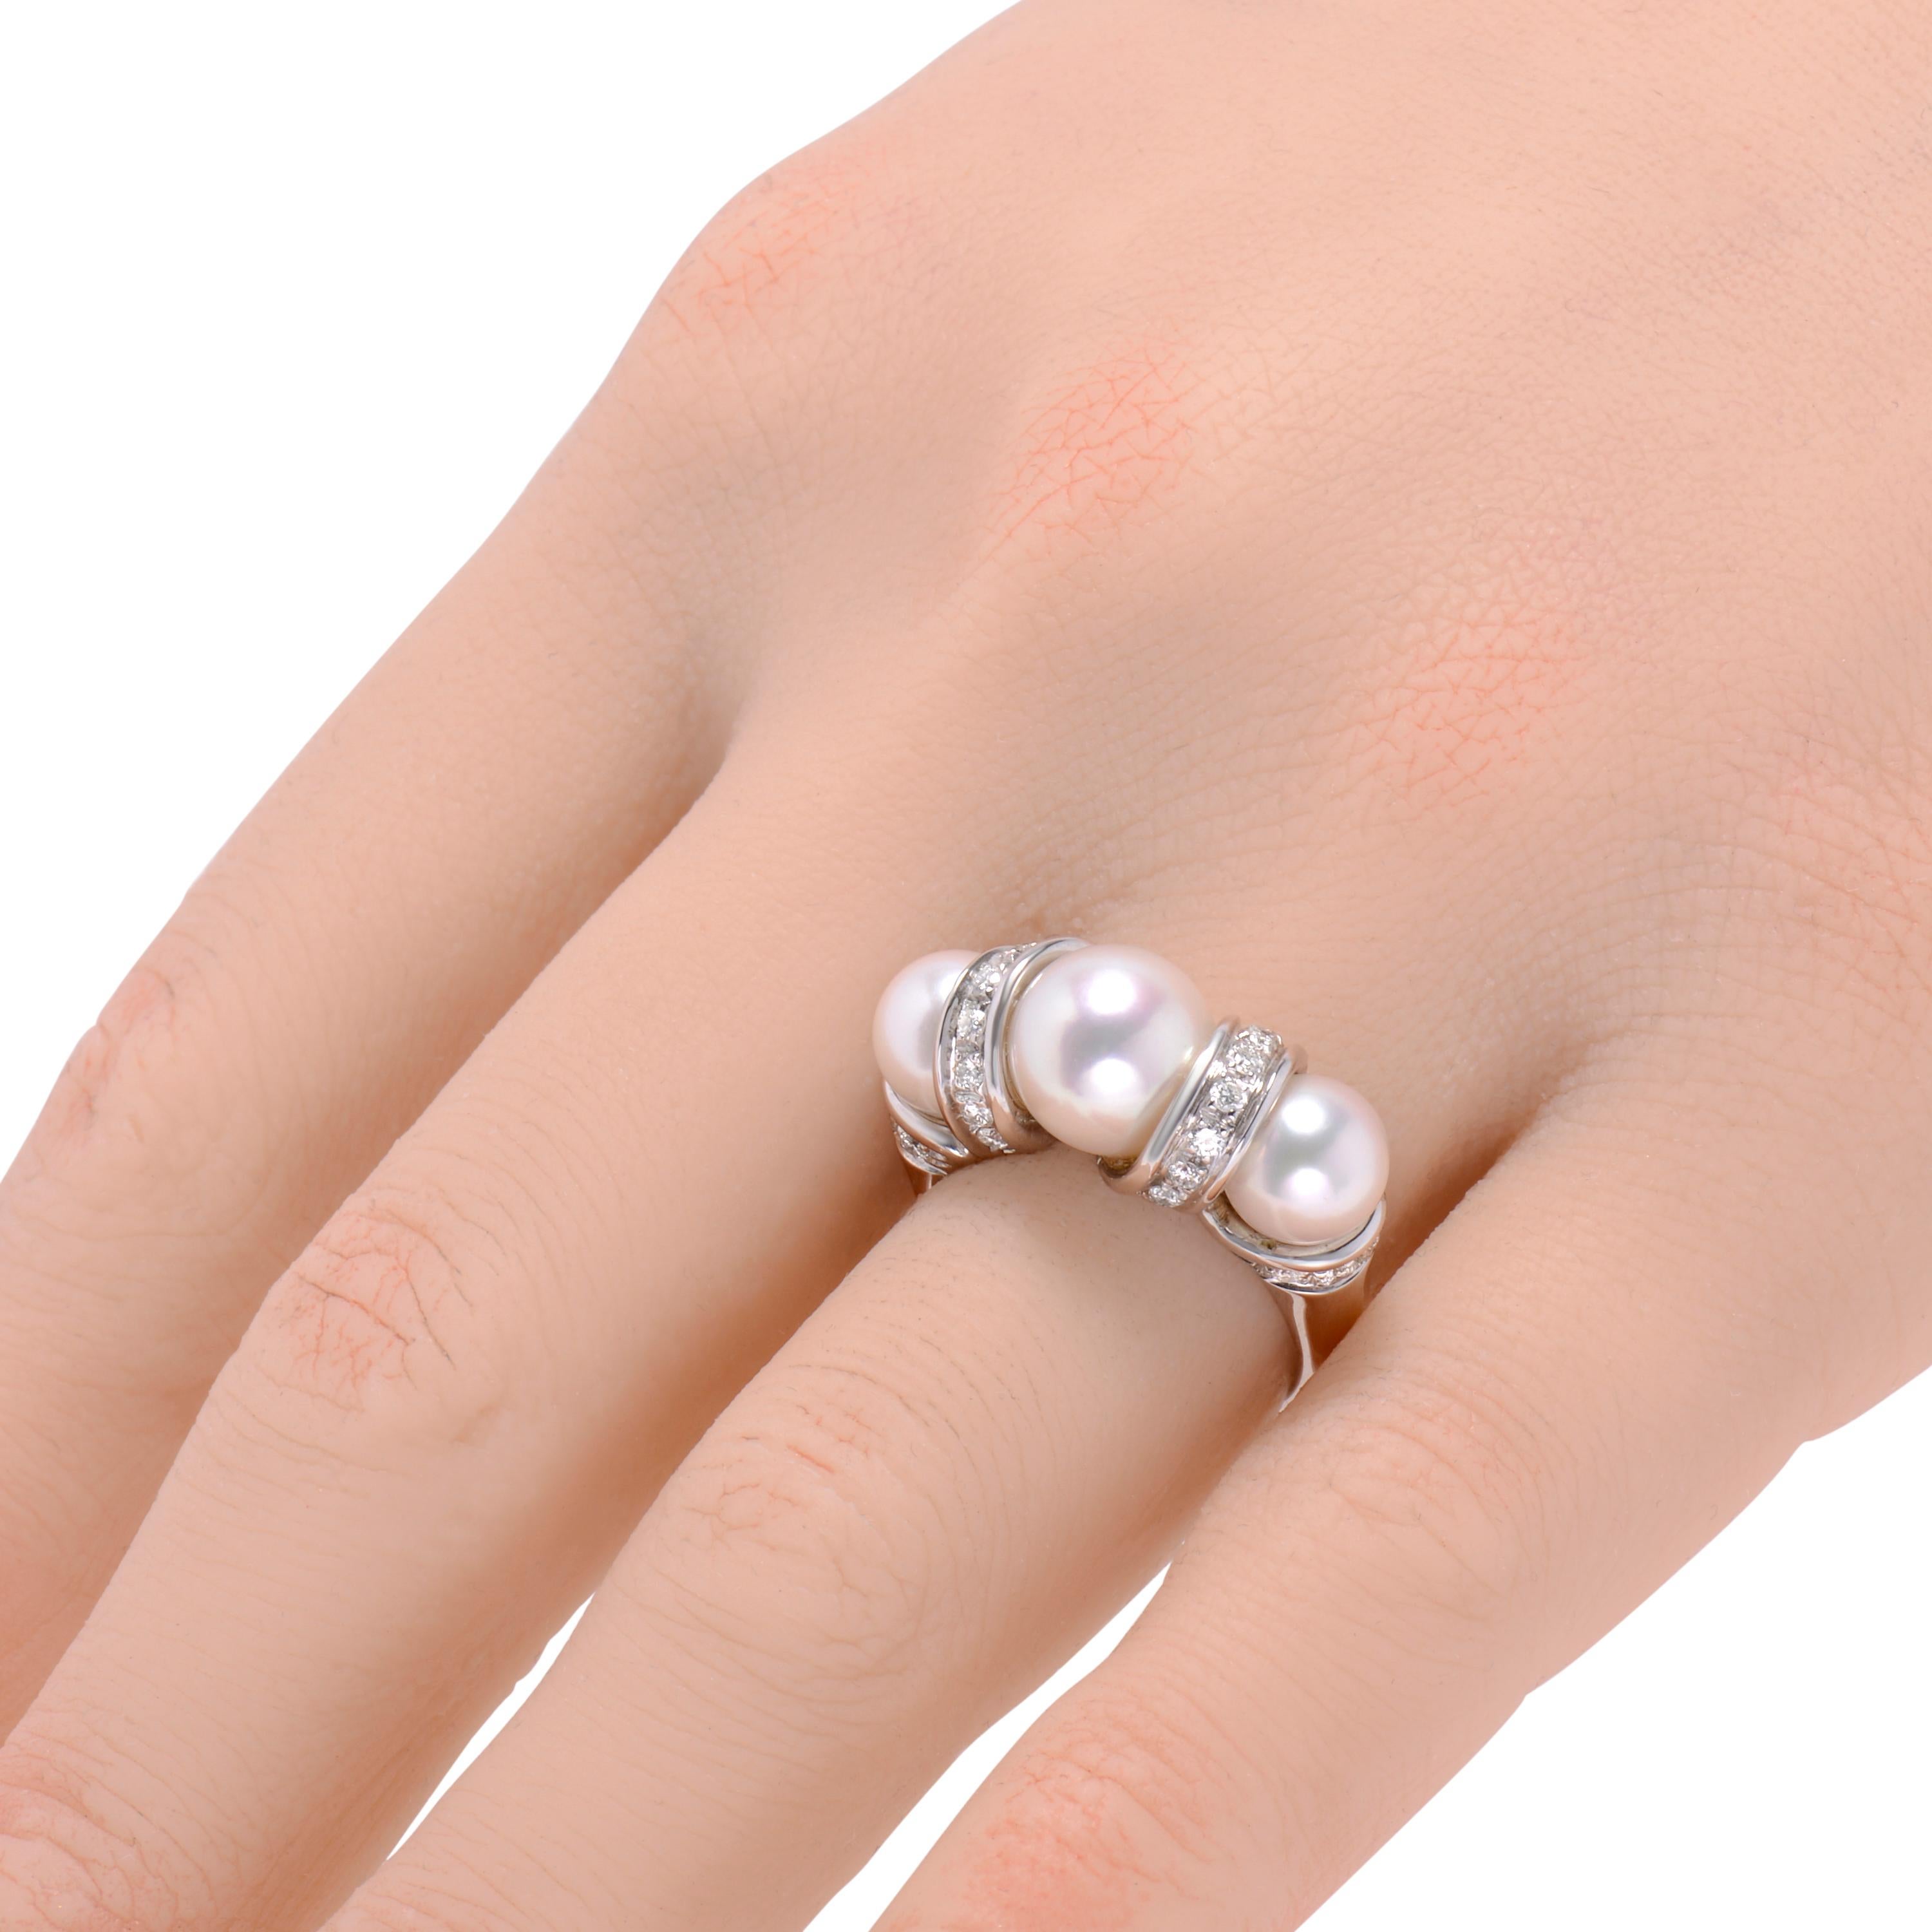 This unique Salvini 18K white gold statement ring features shimmering diamonds (0.45ct twd) enhancing a luscious decoration of pearls (8.5mm, 7mm). The ring size is 6. The band width is 1mm. The weight is 9.6g.
